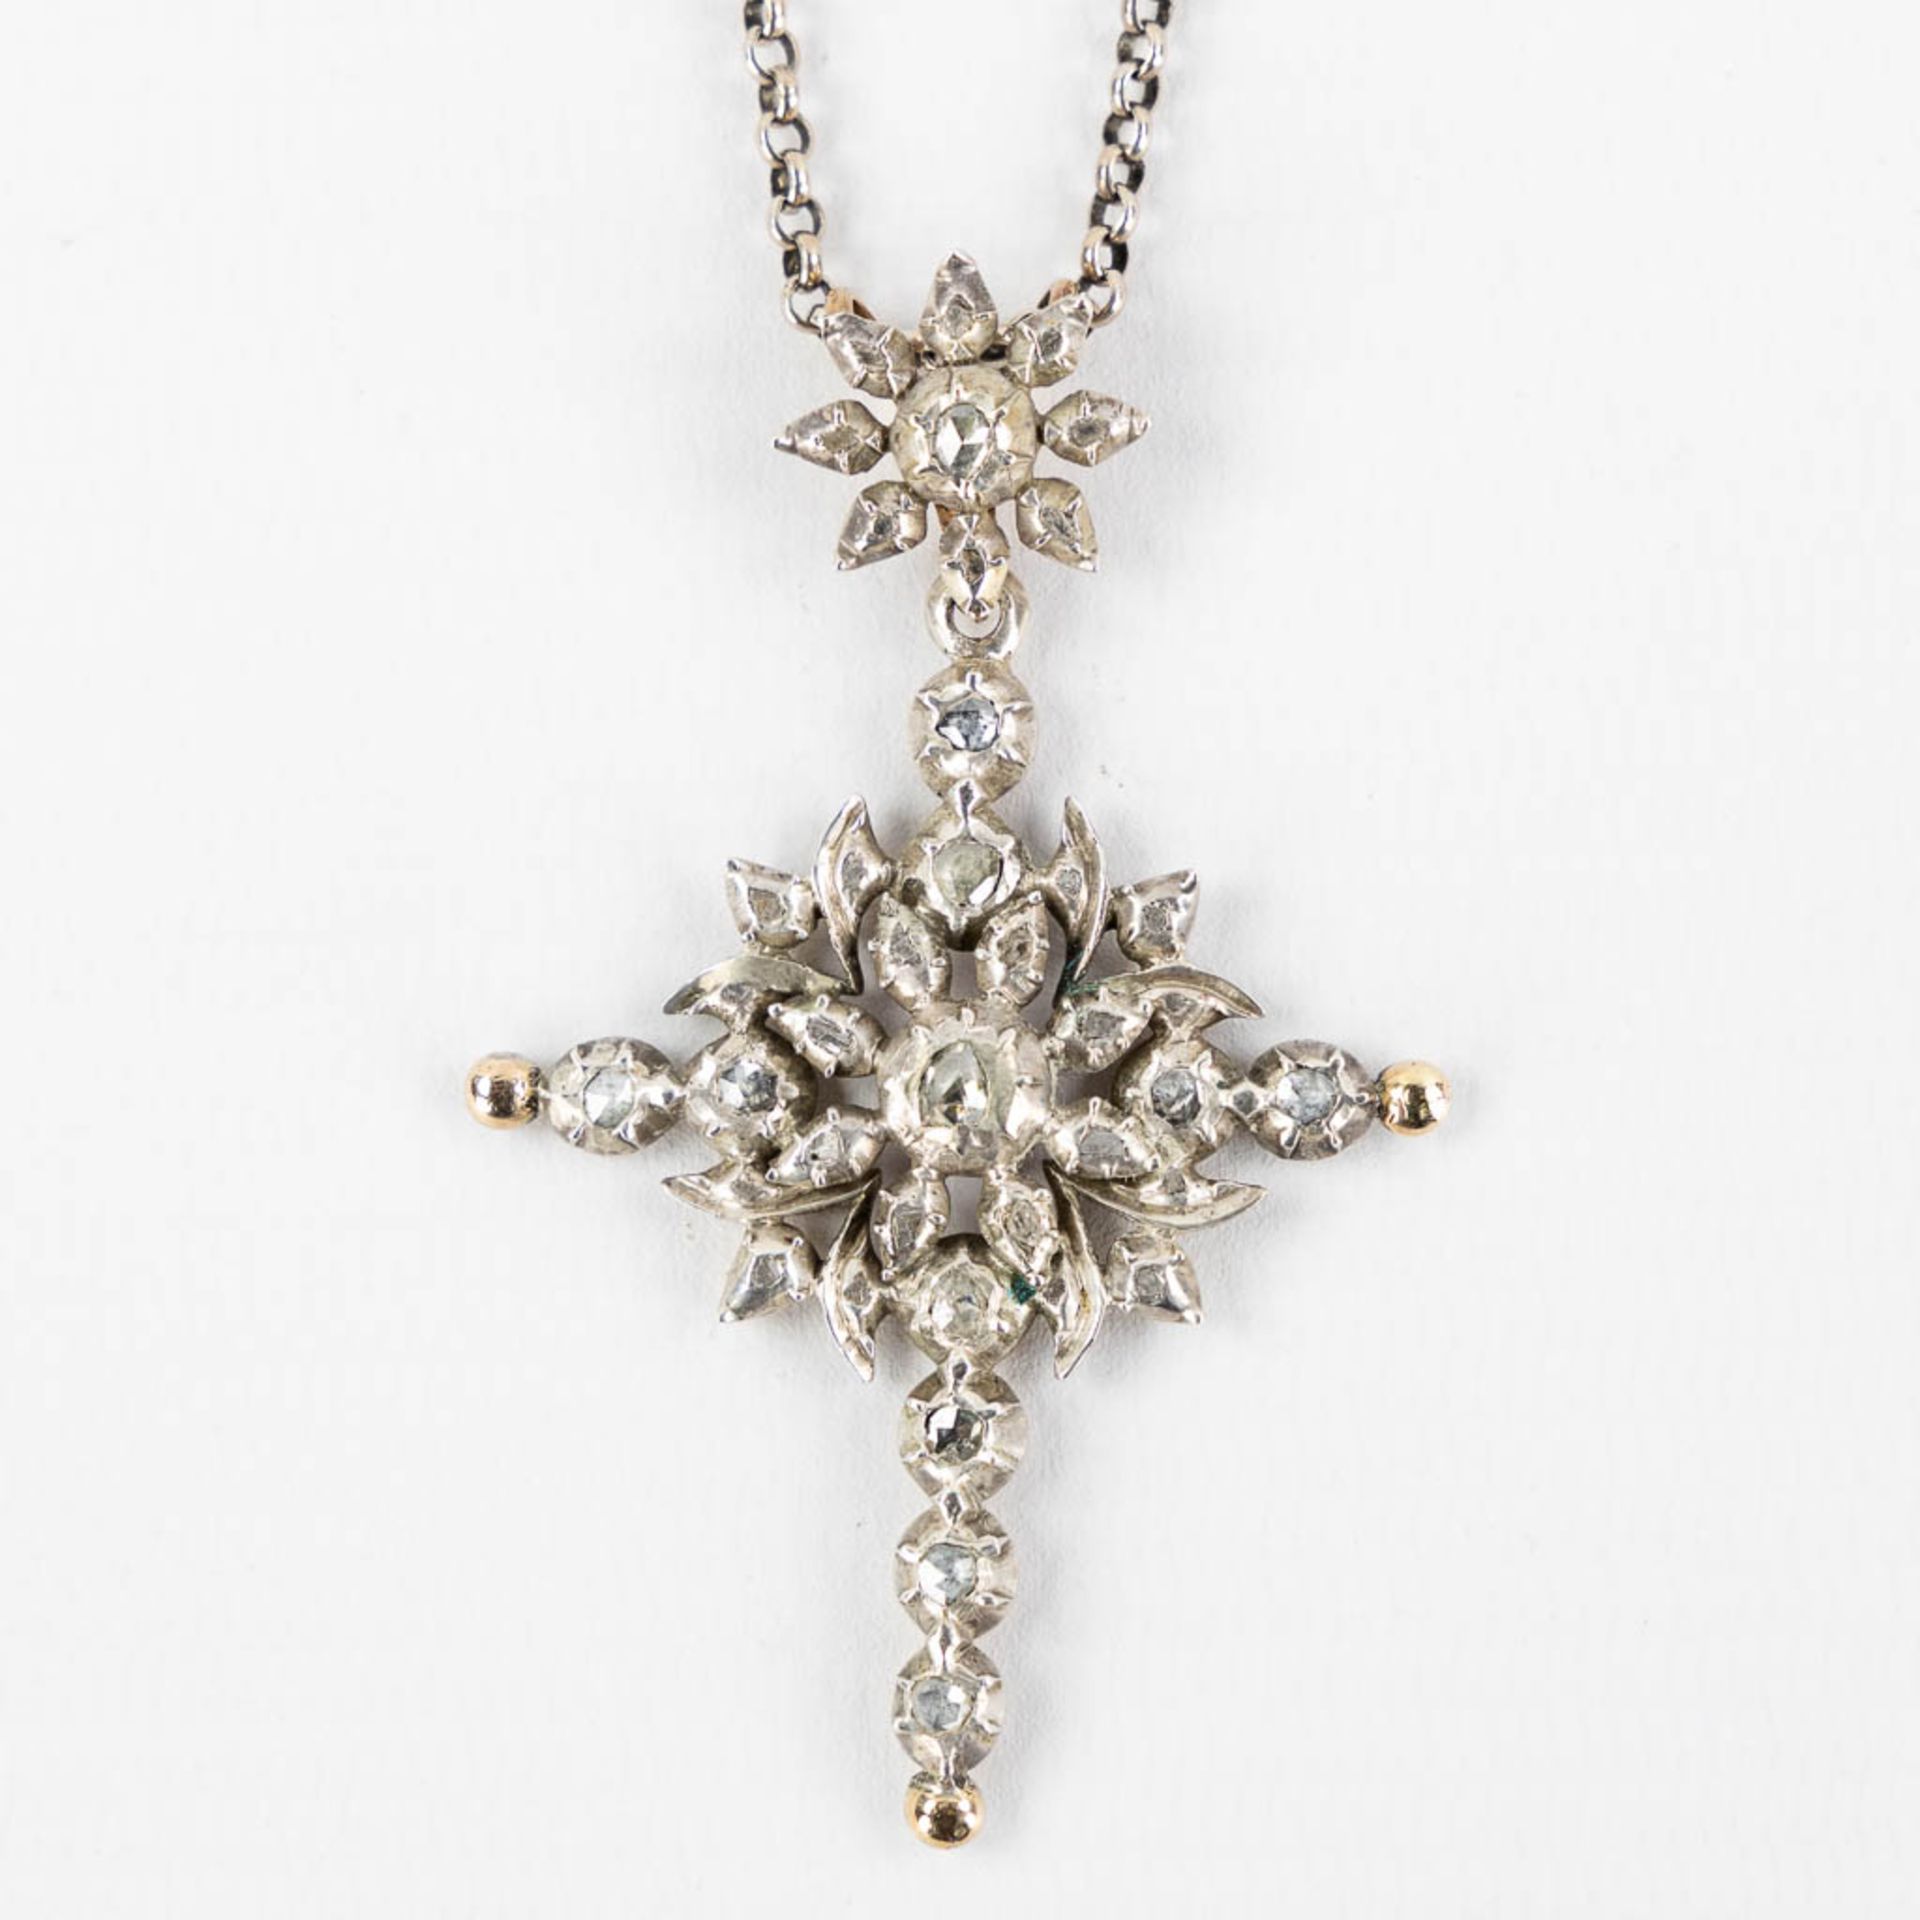 Three antique pendants in the shape of a crucifix, with old-cut diamonds. 18kt white and yelow gold. - Bild 4 aus 9